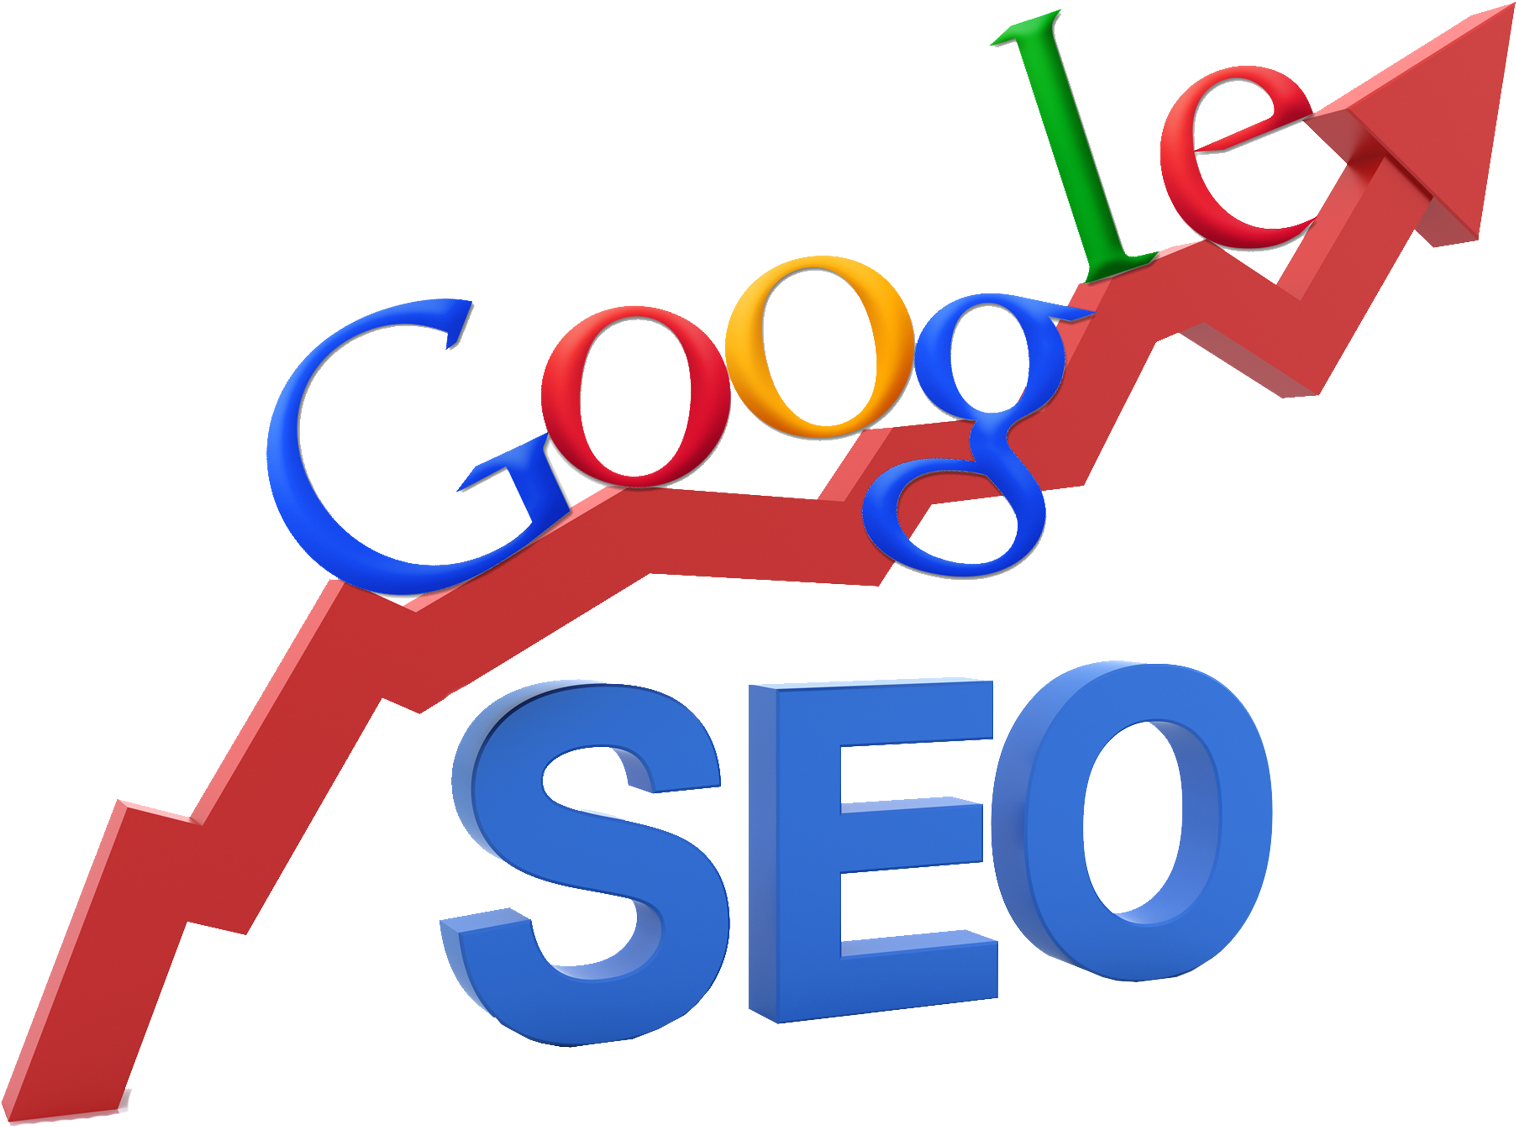 Search Engine Optimisation Seo Service In Reading Berkshire - Seo Services (1732x1155)